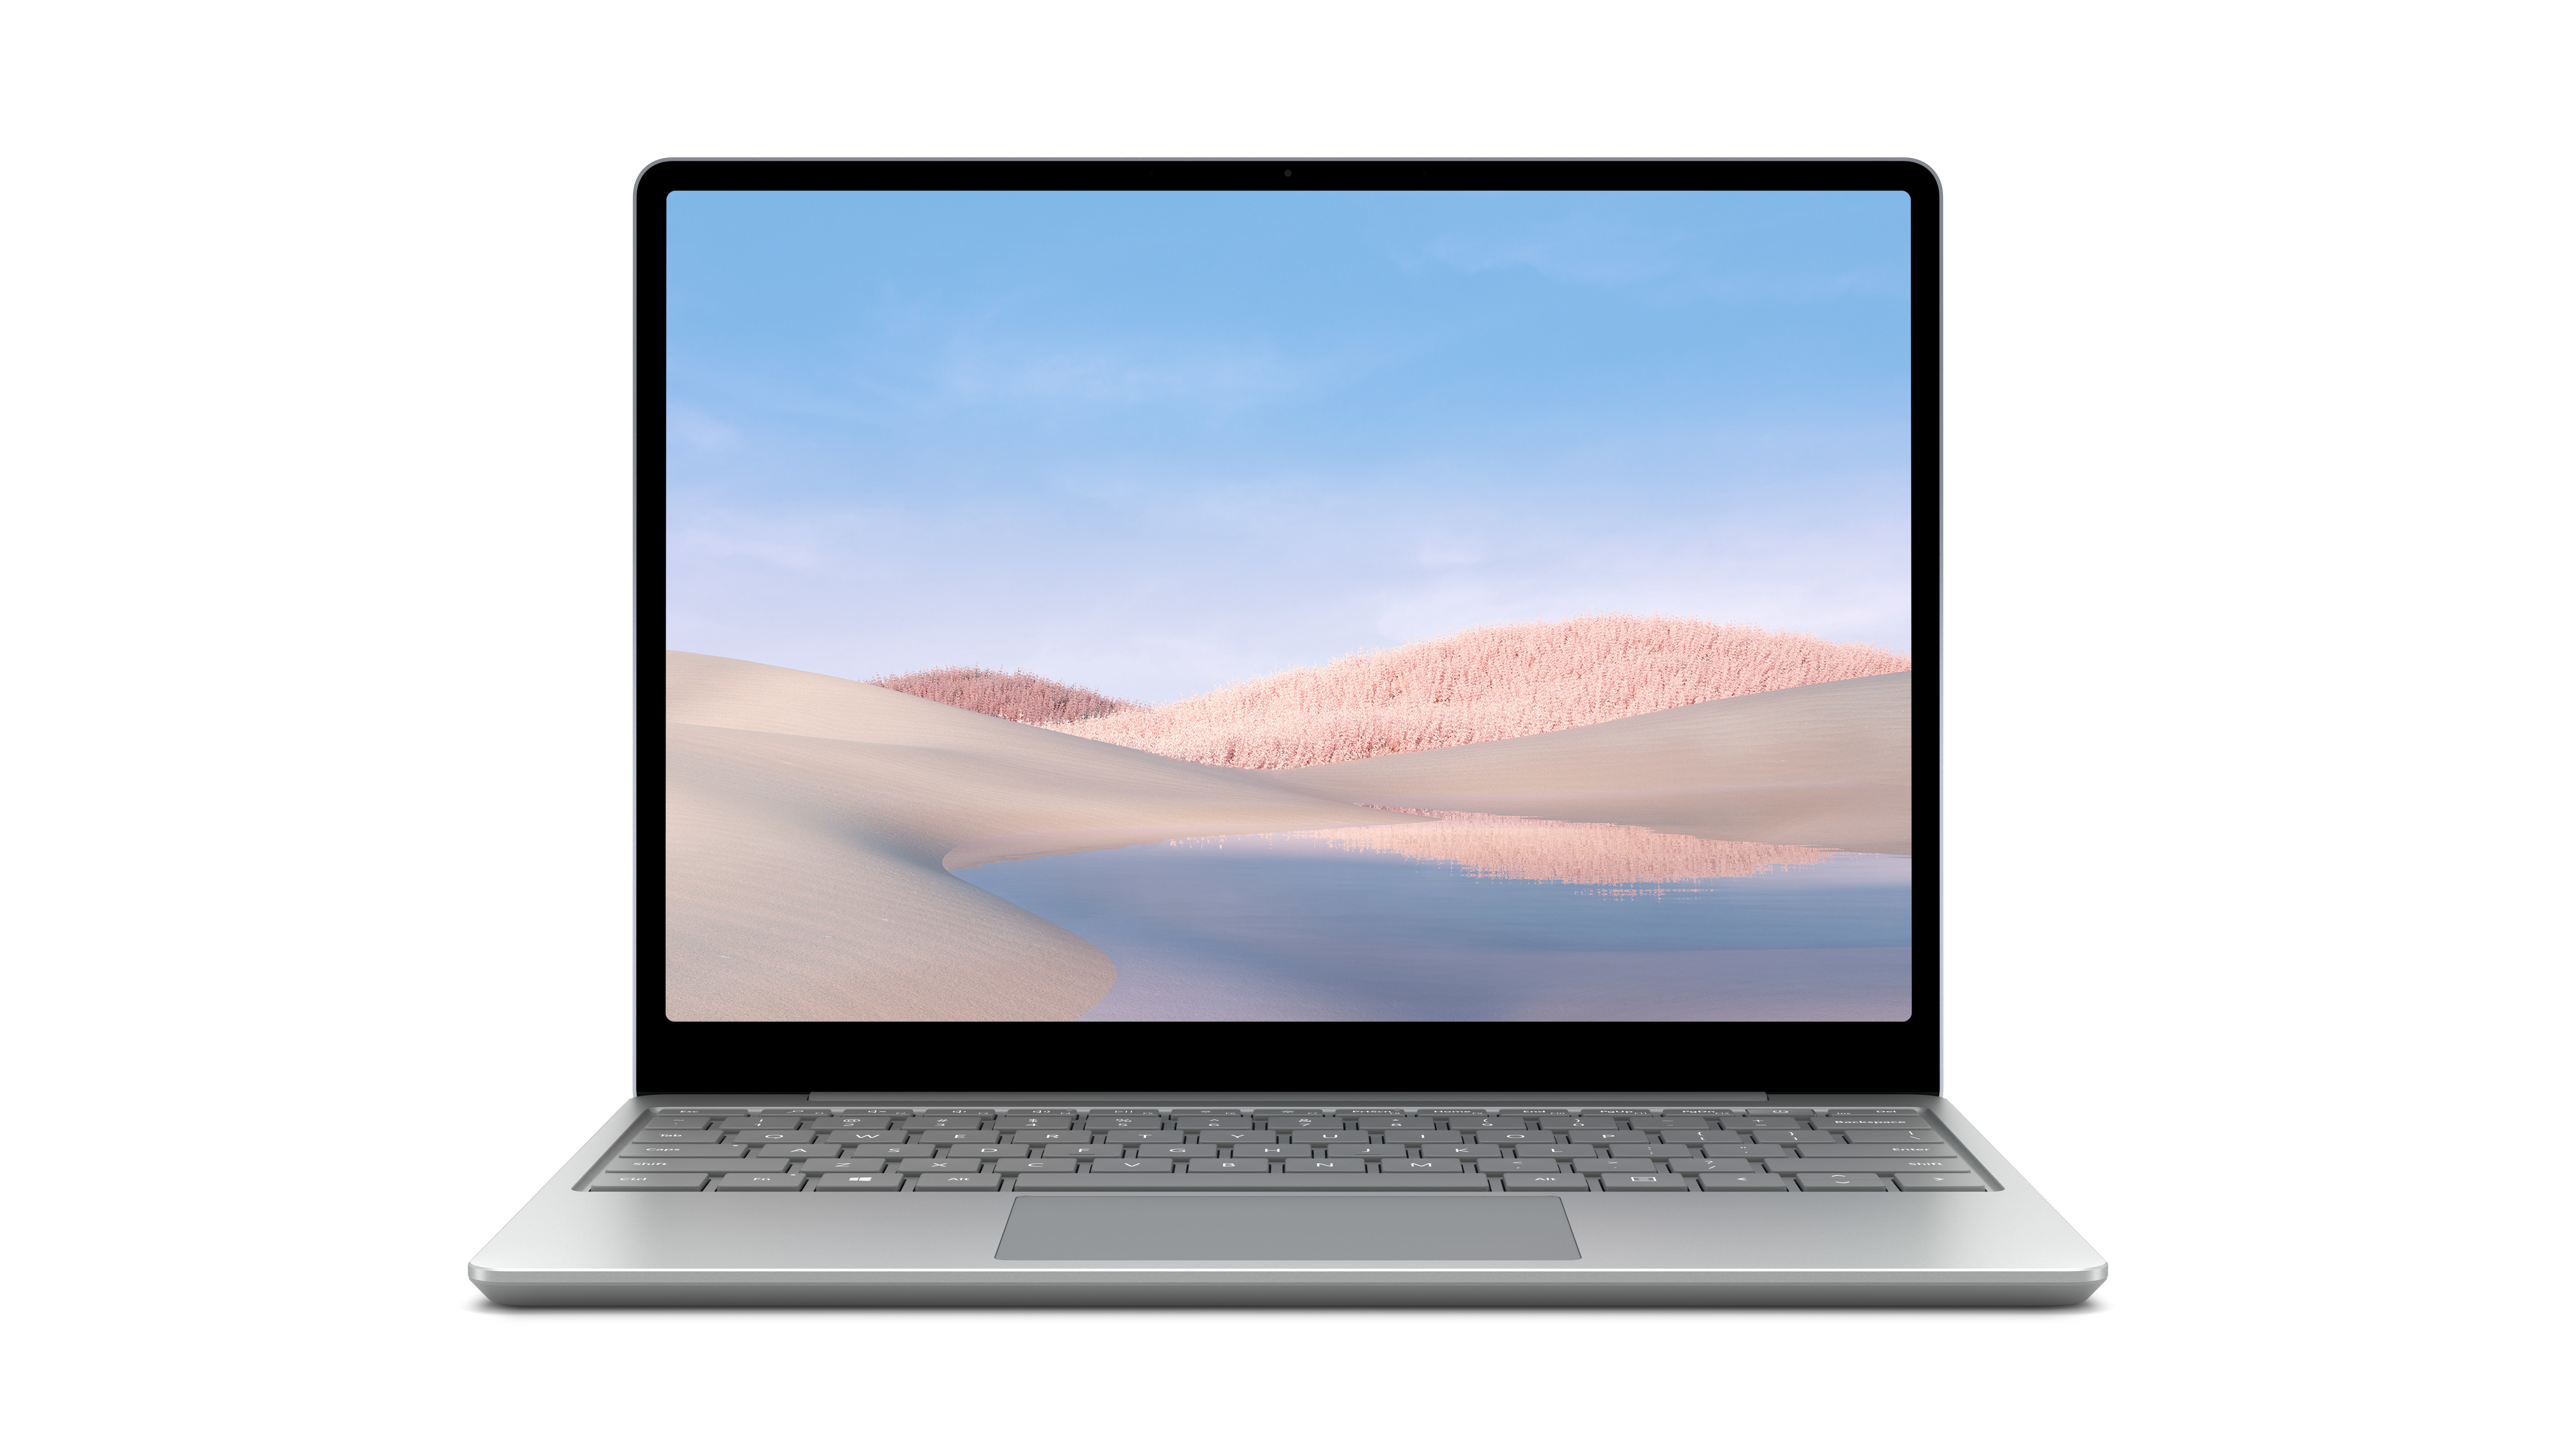 Microsoft Surface Laptop Go i5-1035G1 8GB 128SSD 12.4 Touch W10 Home S Platinum